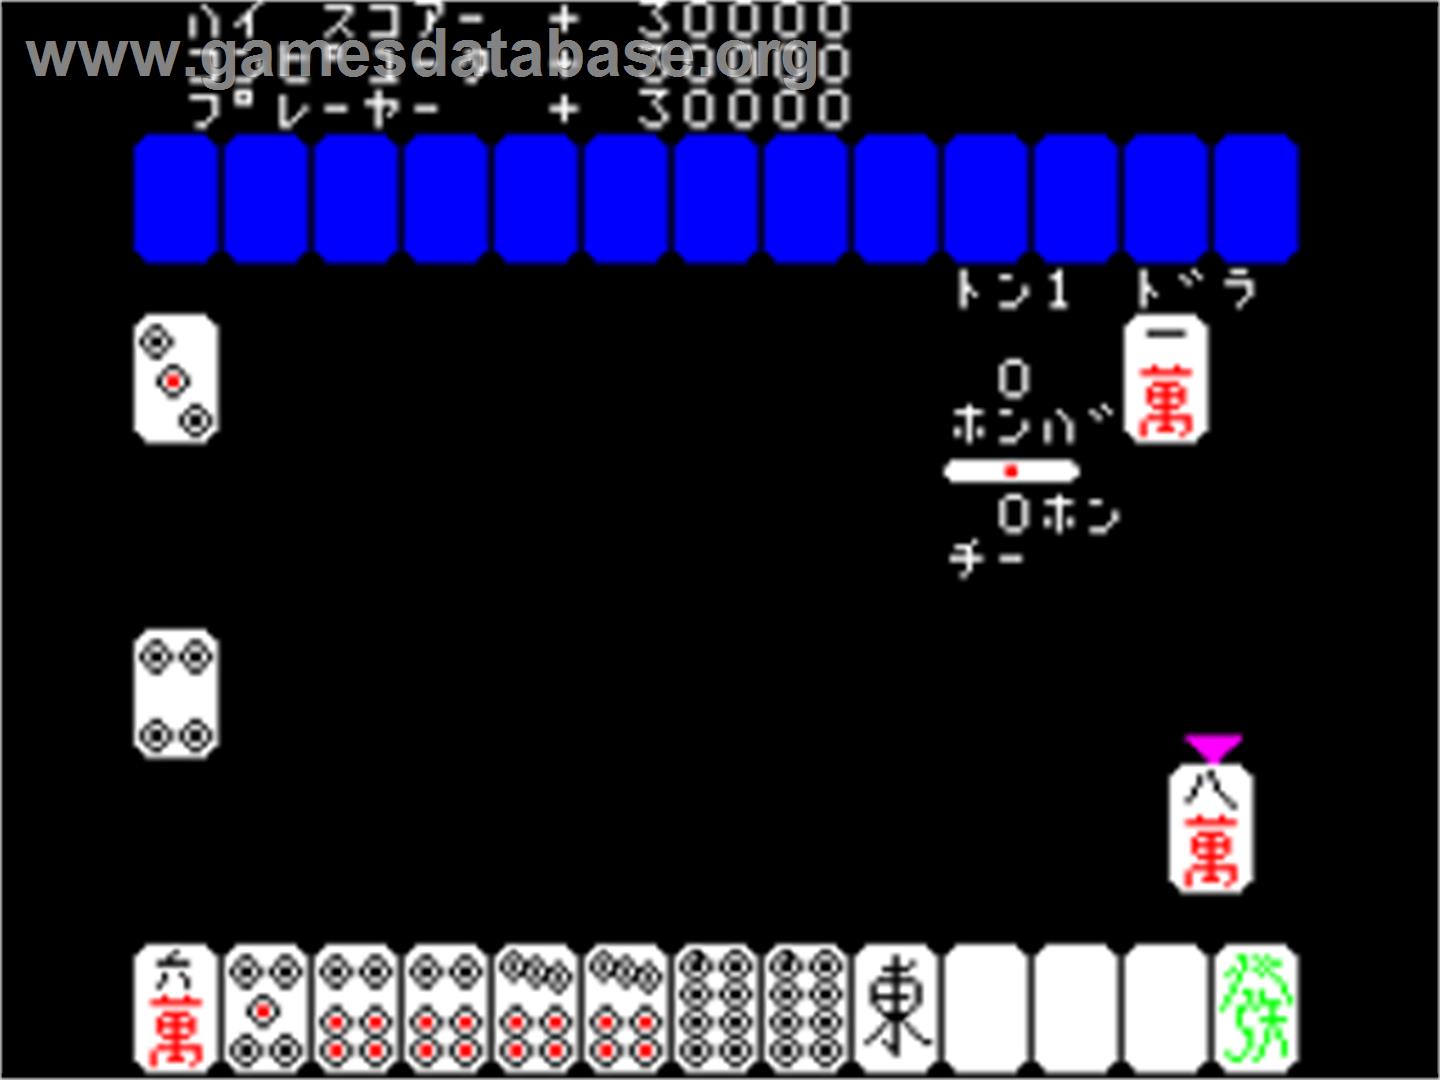 Excite Mahjong - Casio PV-1000 - Artwork - In Game